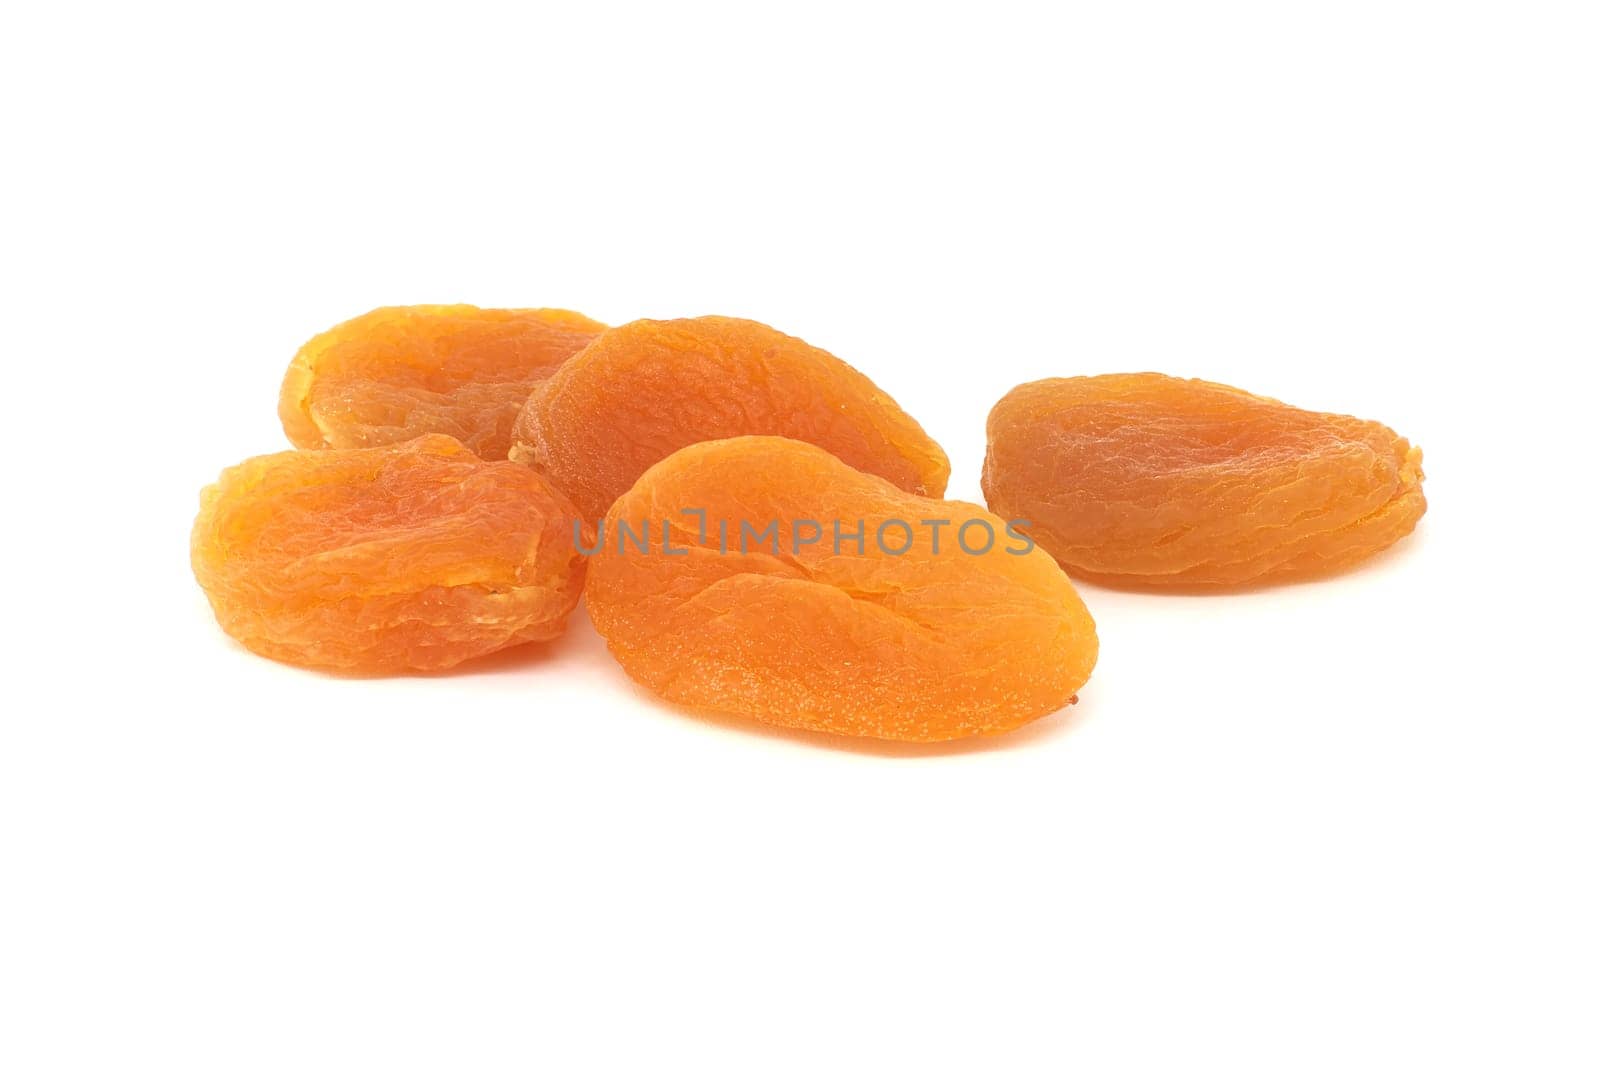 Dried apricots fruits isolated on white background by NetPix